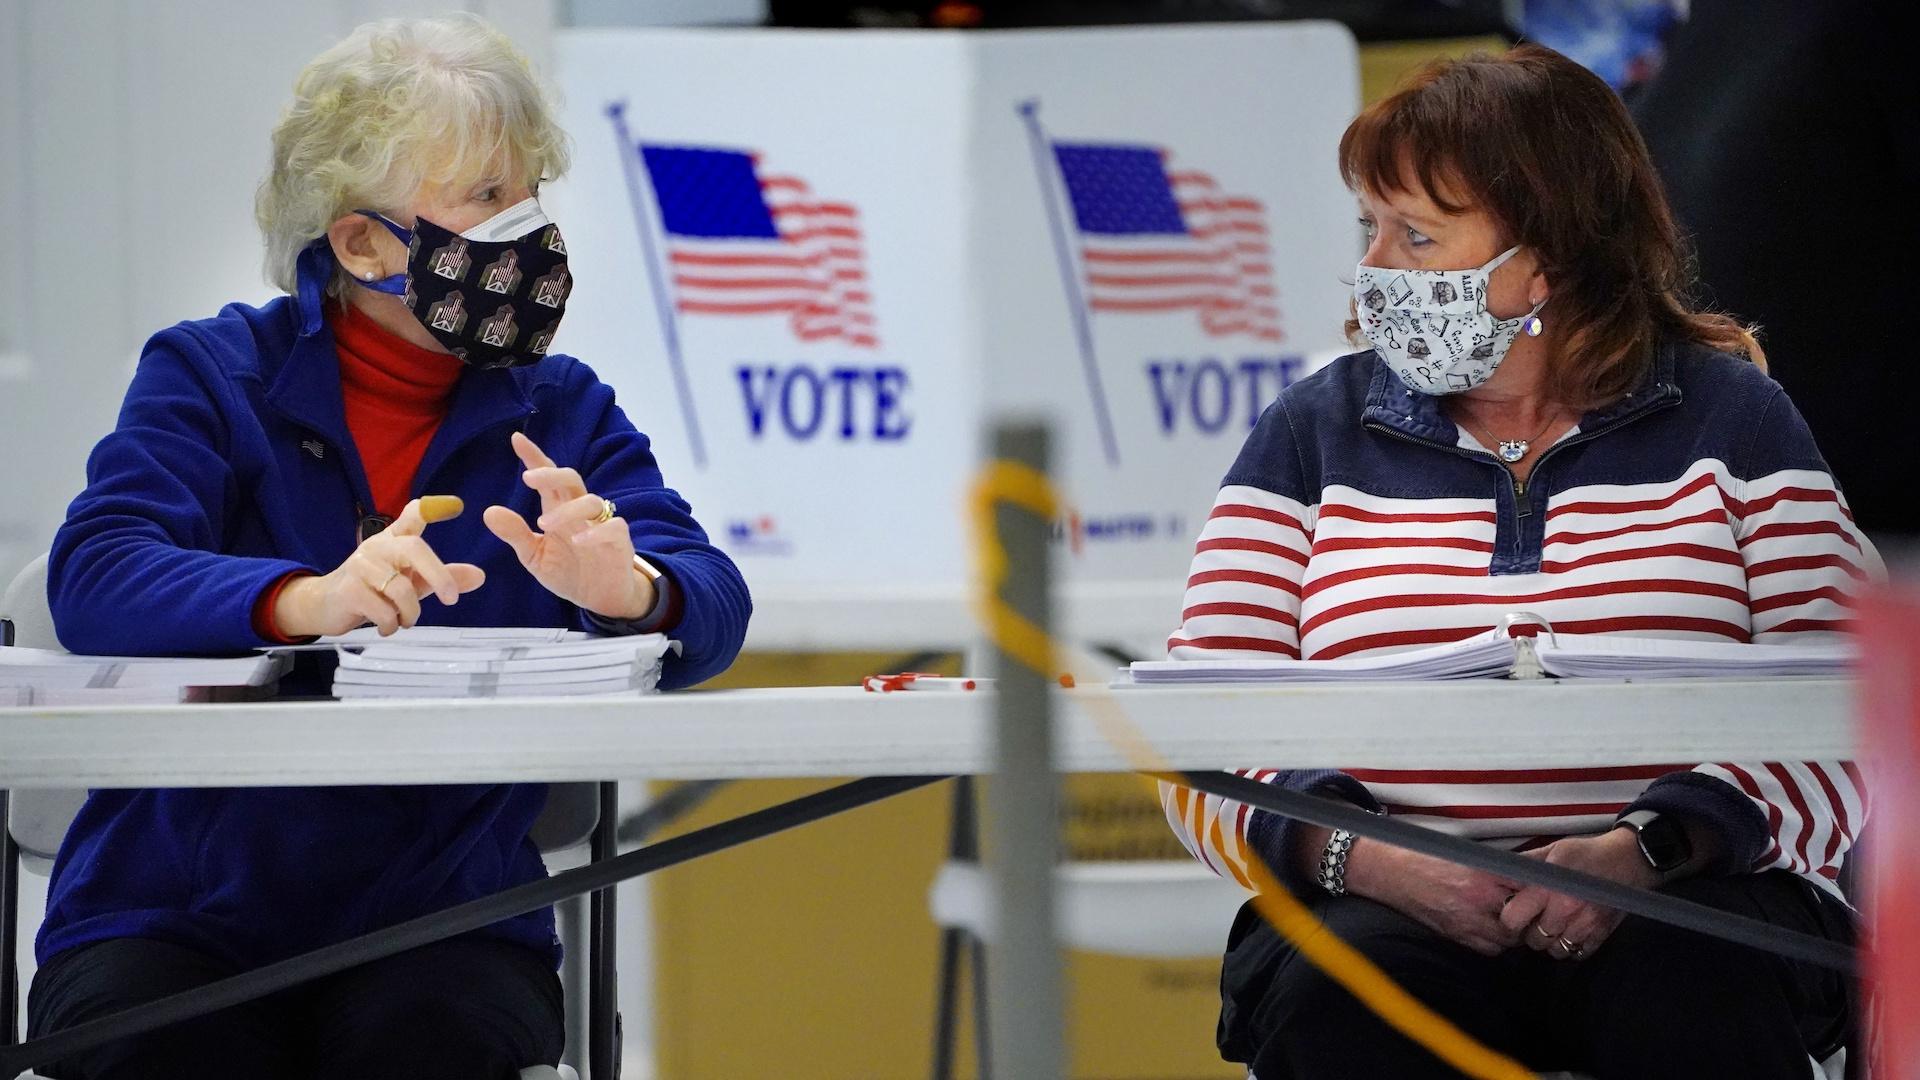 Election workers Sheila McDonough, left, and Kathleen Reid chat while waiting for voters at the American Legion Post 35 poling place, Tuesday, Nov. 2, 2021, in South Portland, Maine. (AP Photo/Robert F. Bukaty)